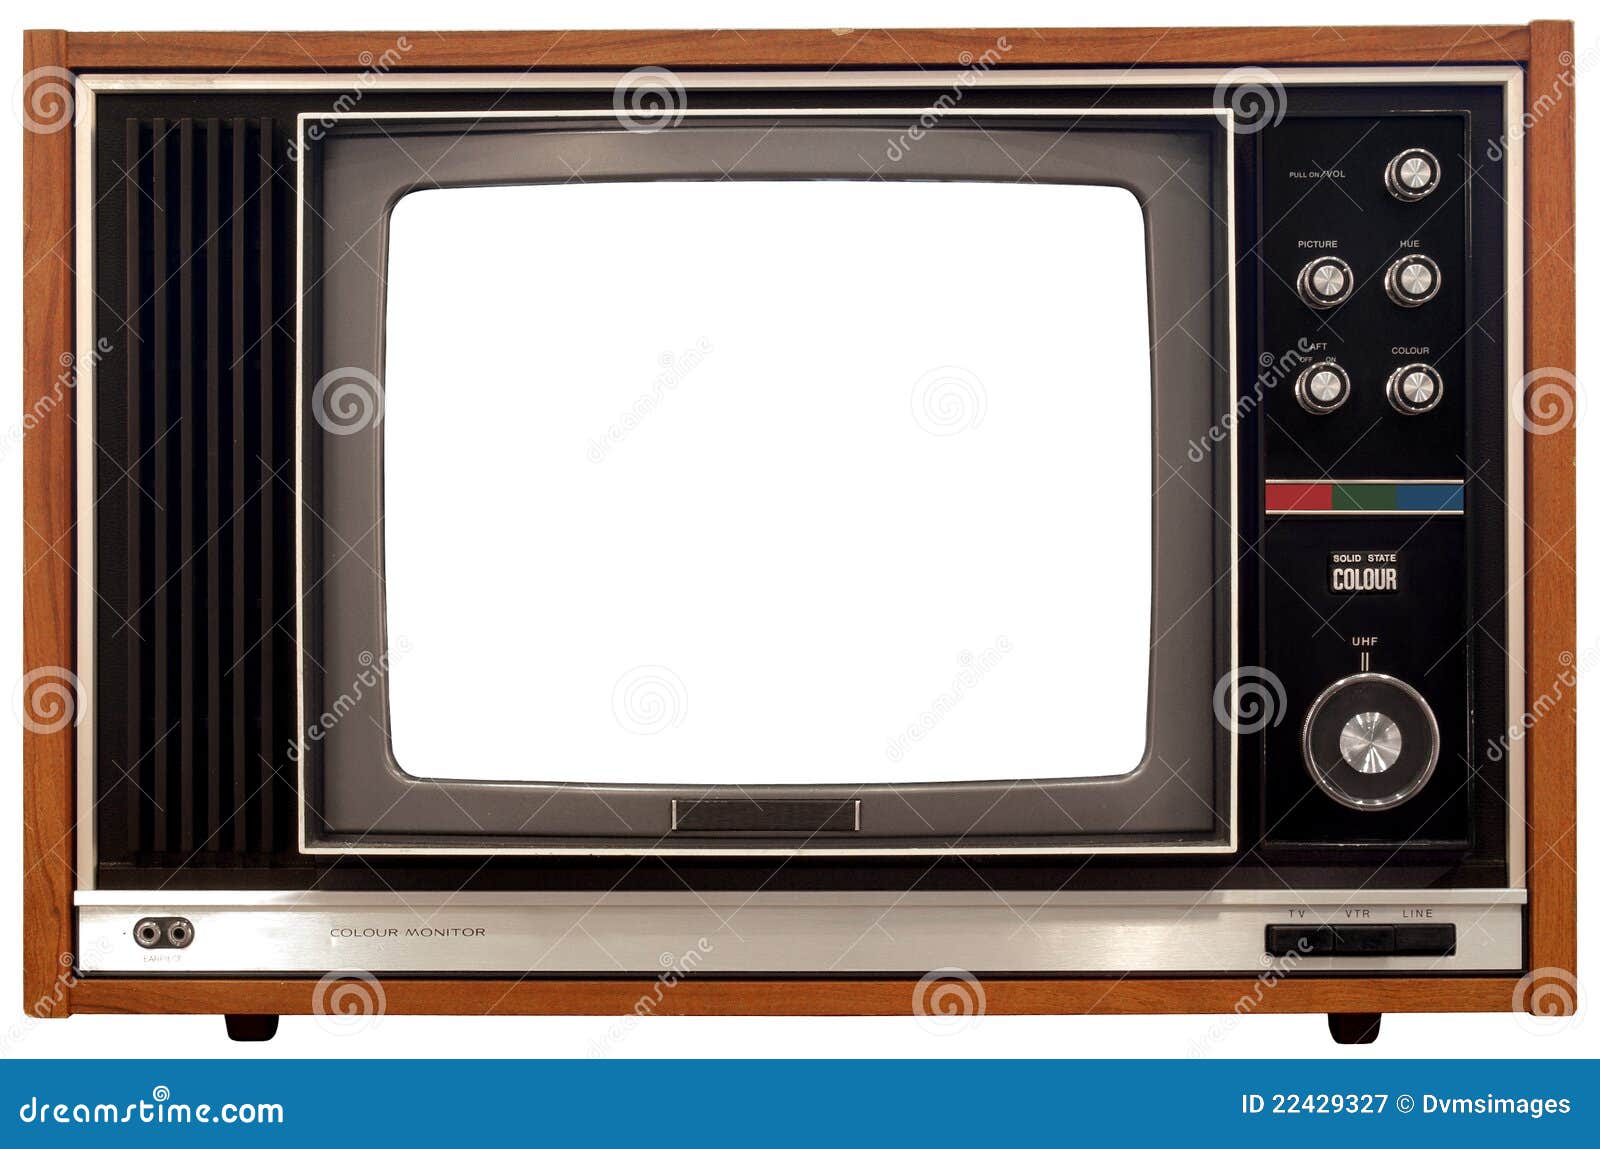 old color television